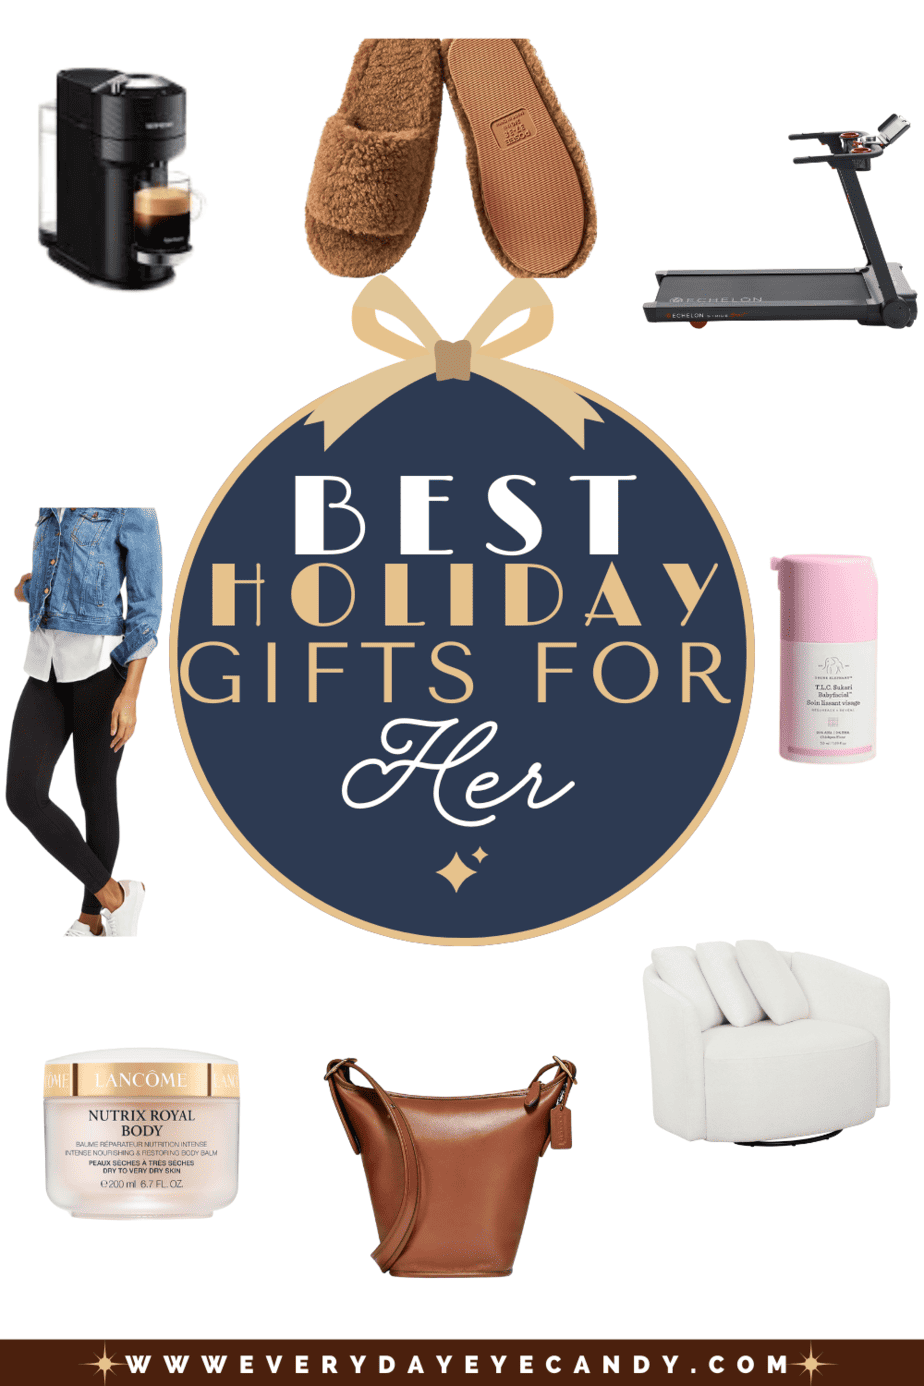 THE REALLY USEFUL GIFT GUIDE